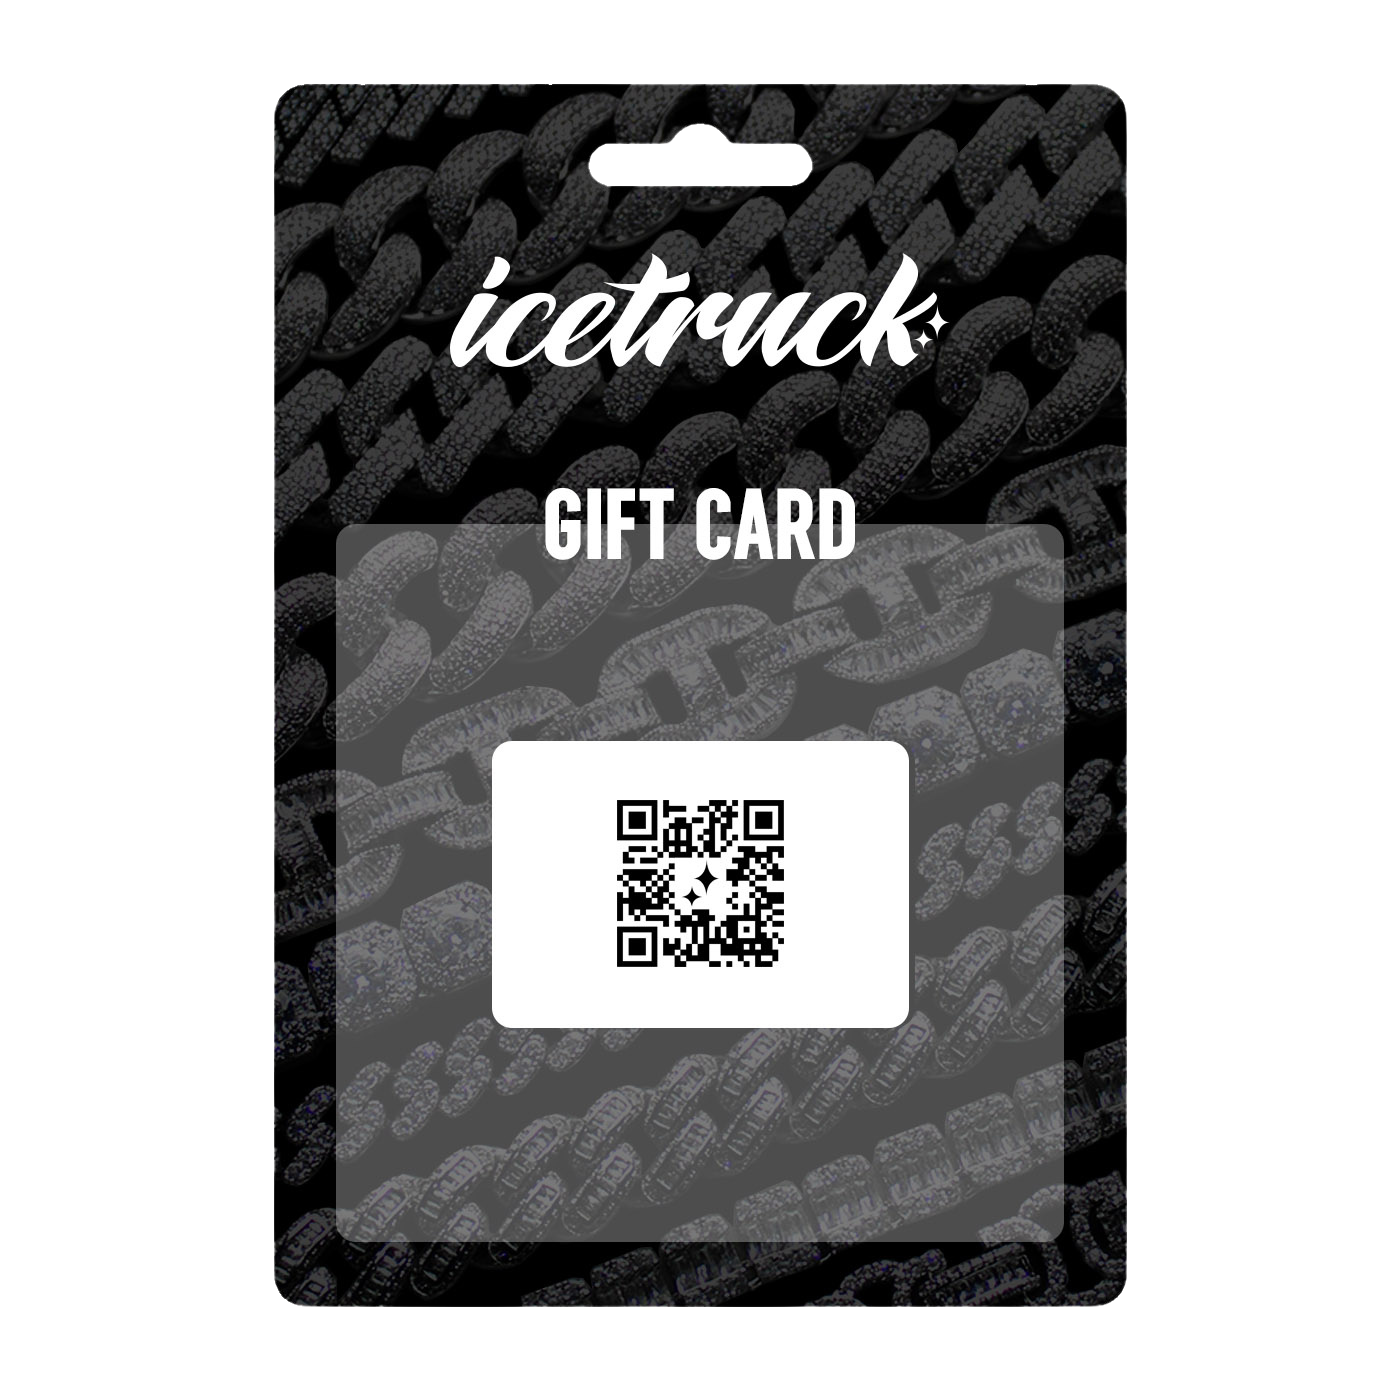 Icetruck® Giftcard